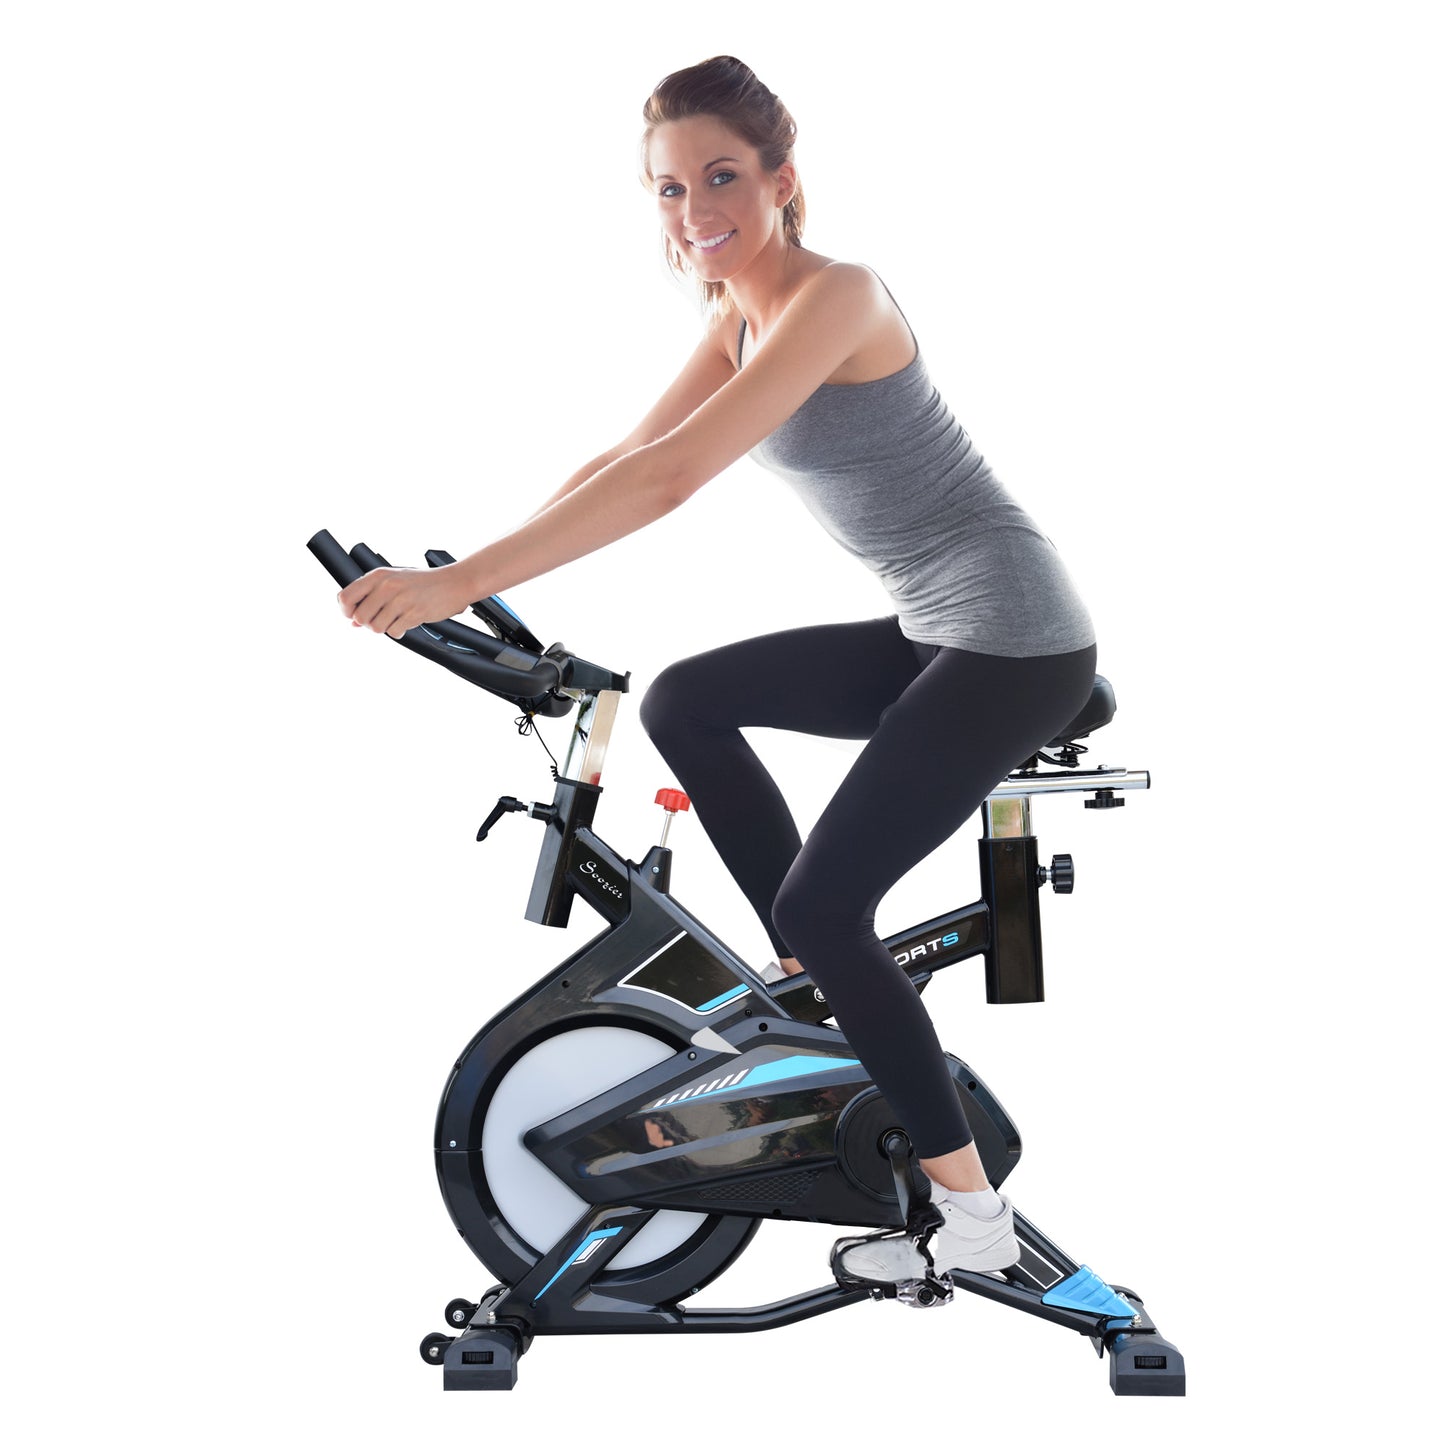 Soozier Indoor Cycling Bicycle Cardio Workout Trainer Heart Pulse